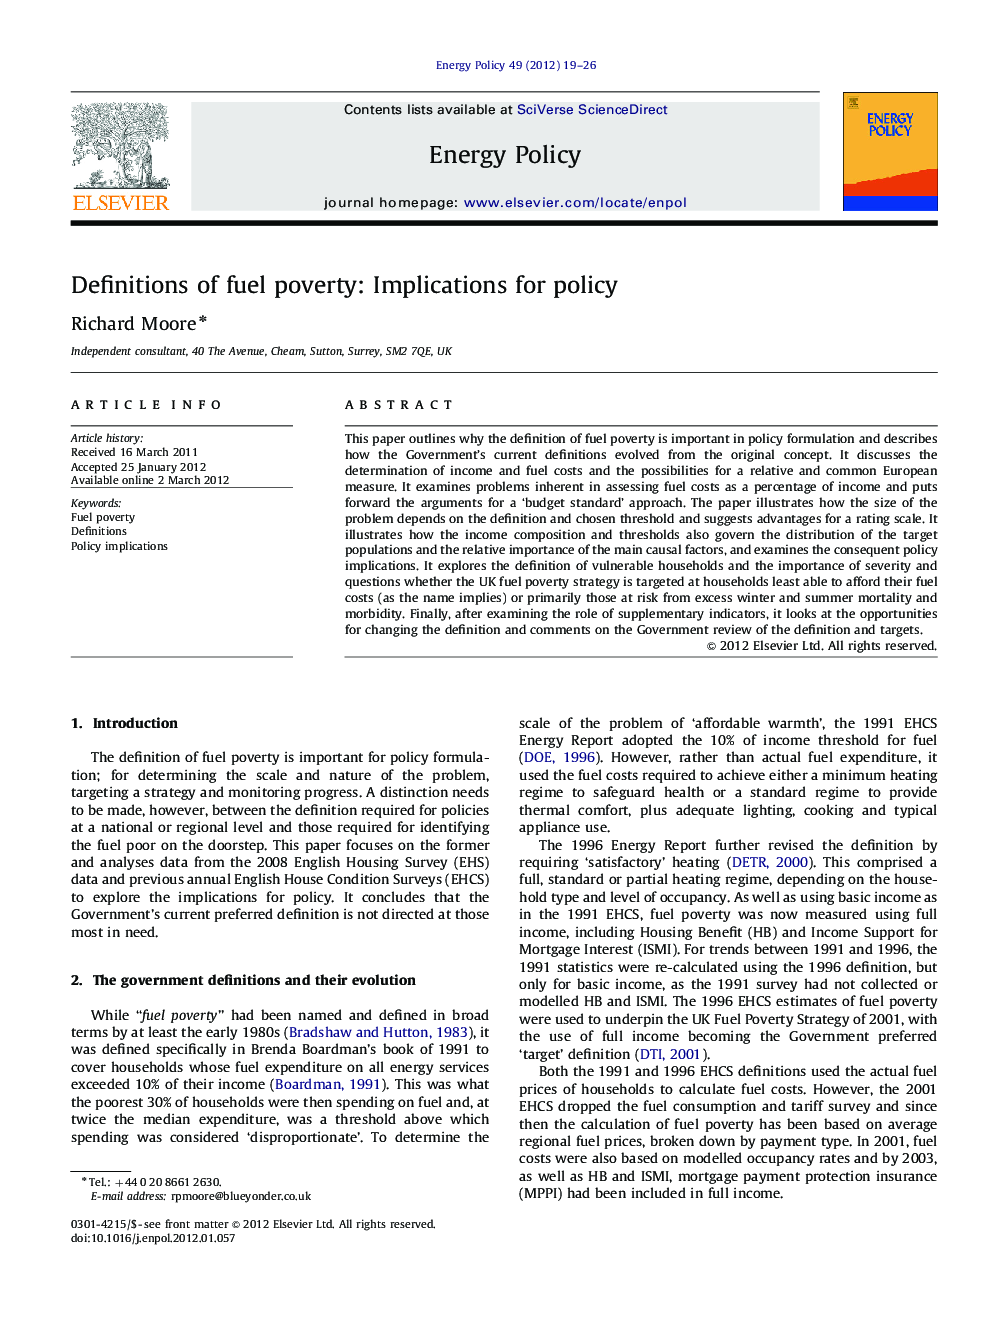 Definitions of fuel poverty: Implications for policy